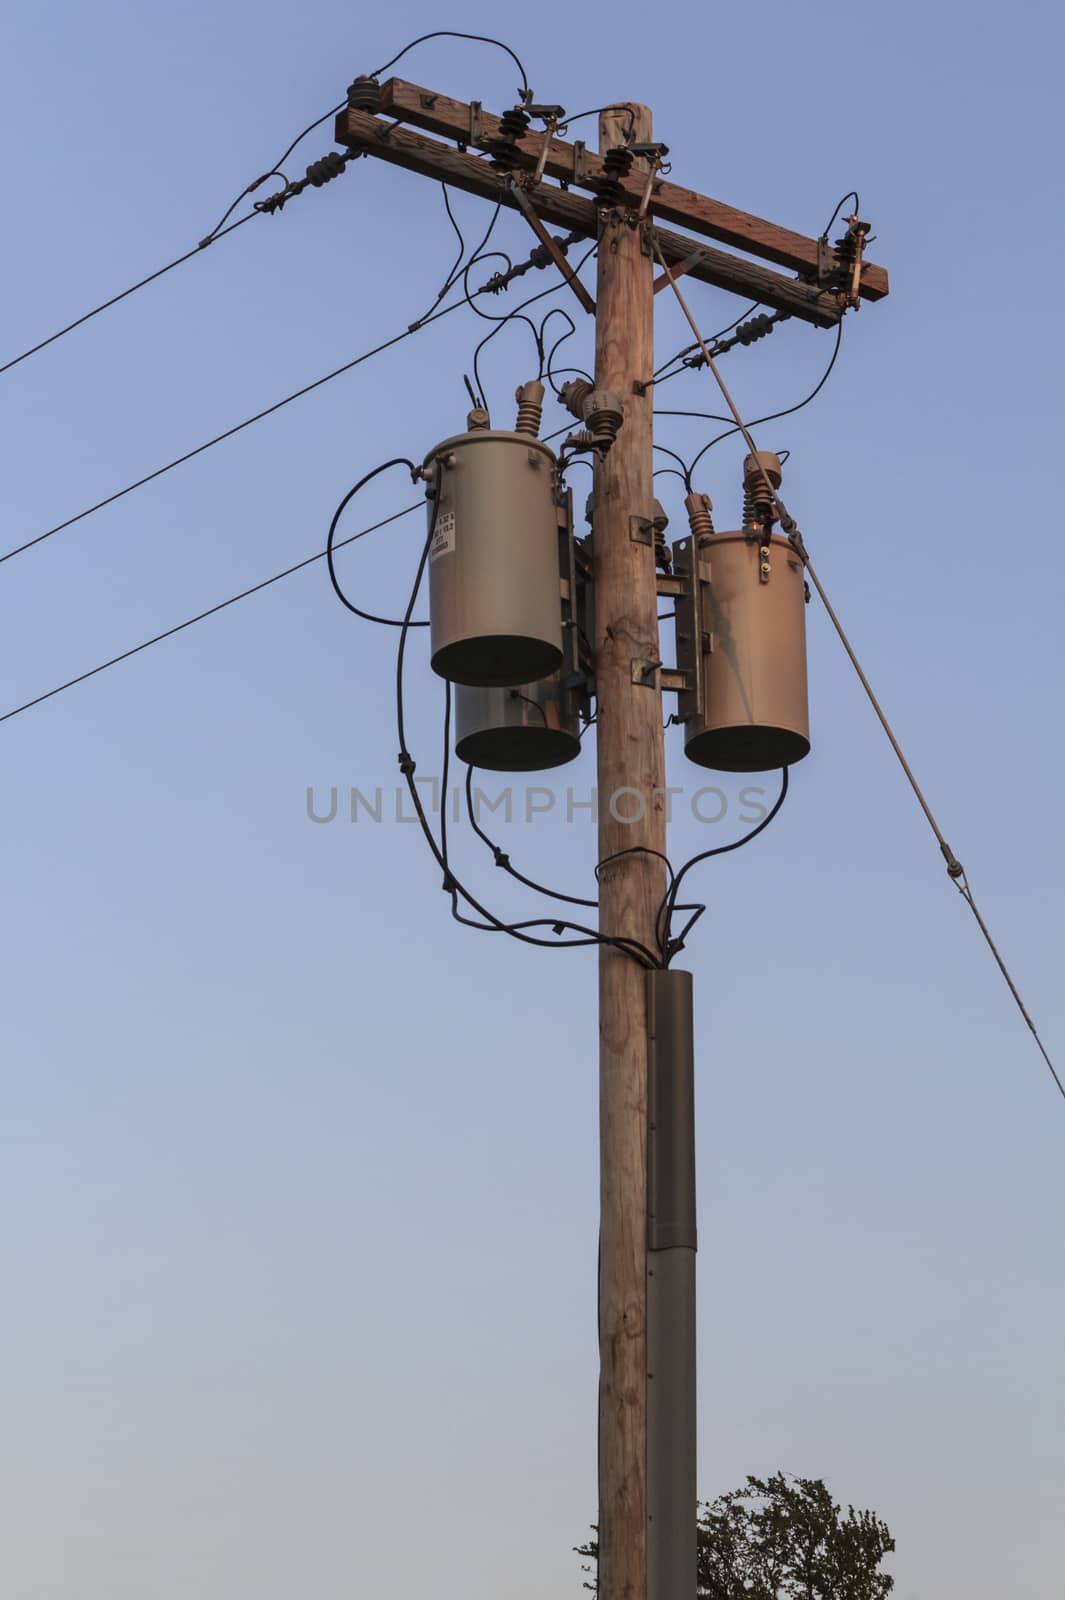 Wooden electric pole with many wire cables and grey metal transformers. 